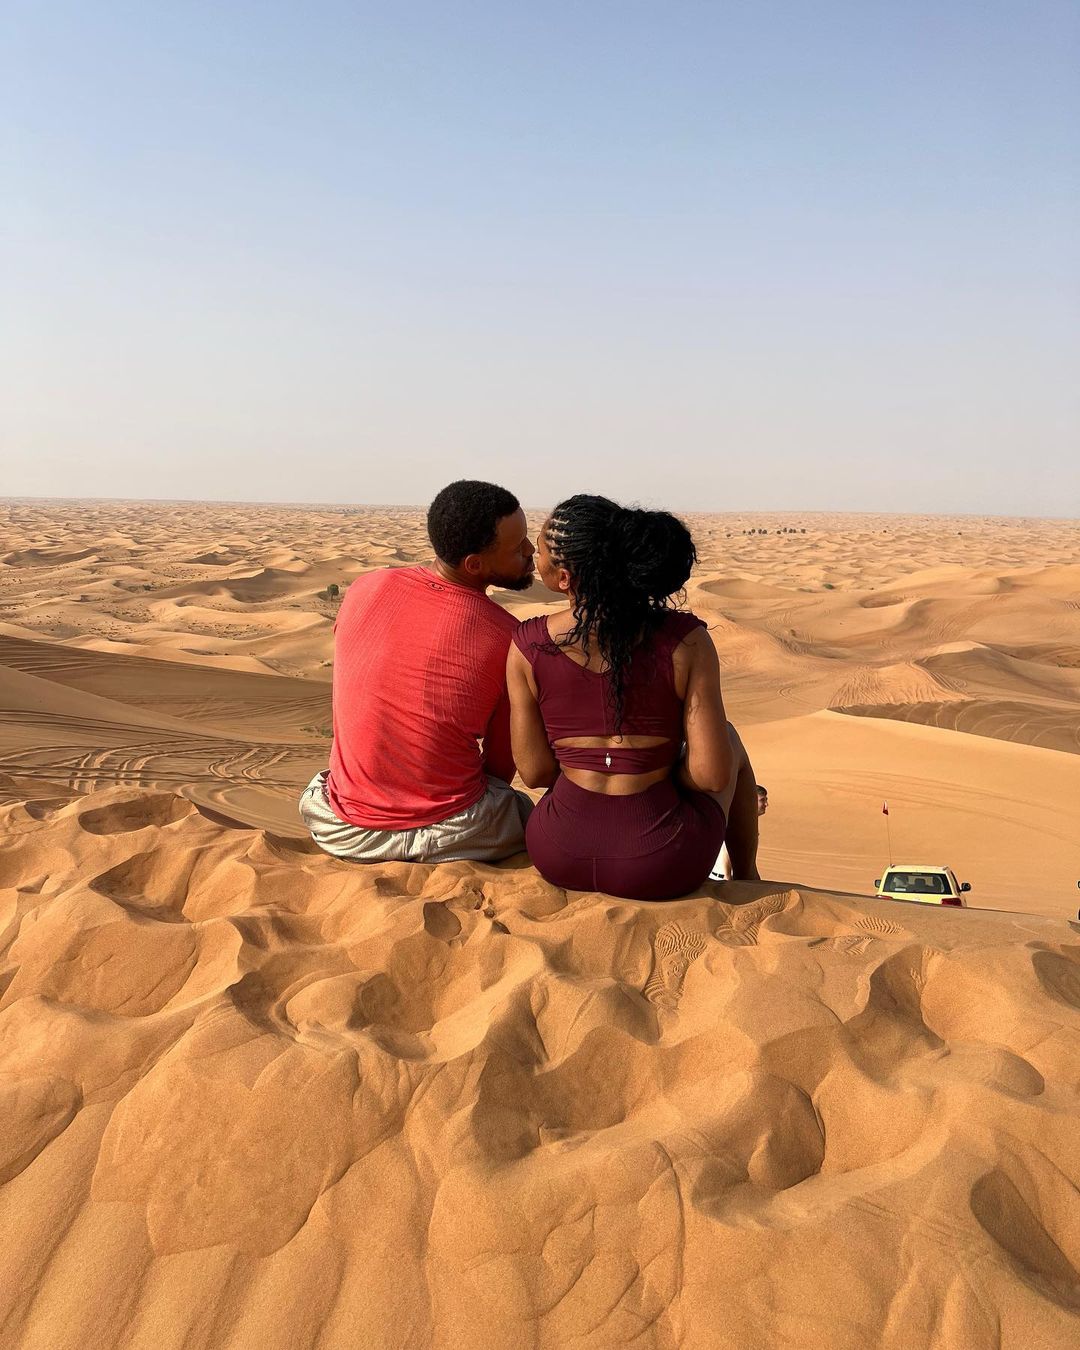 Steph Curry and Ayesha conquered some workouts in the desert dunes